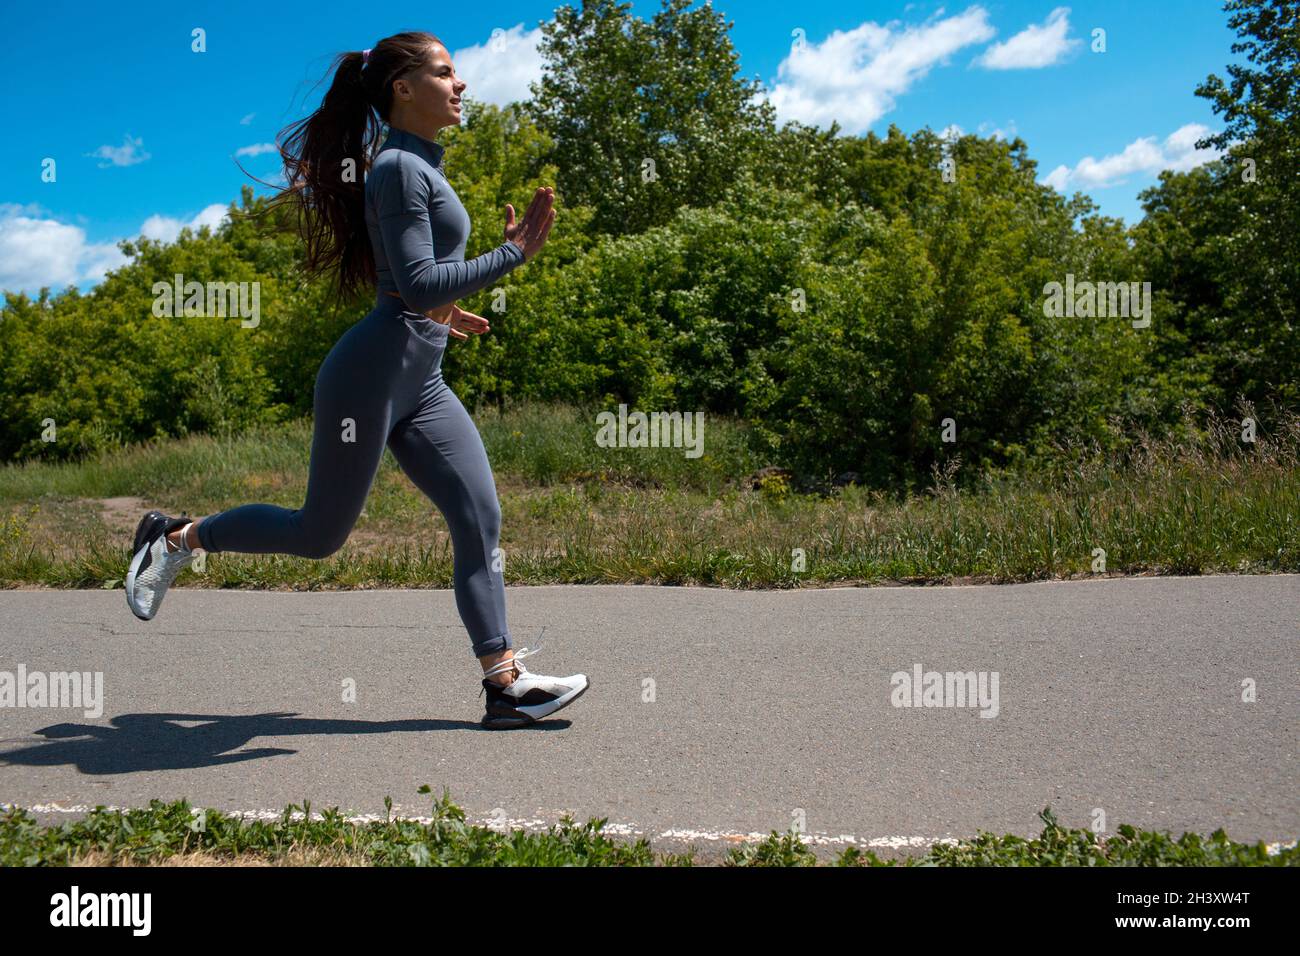 Running girl in city park. Young woman runner outdoor jogging. Stock Photo